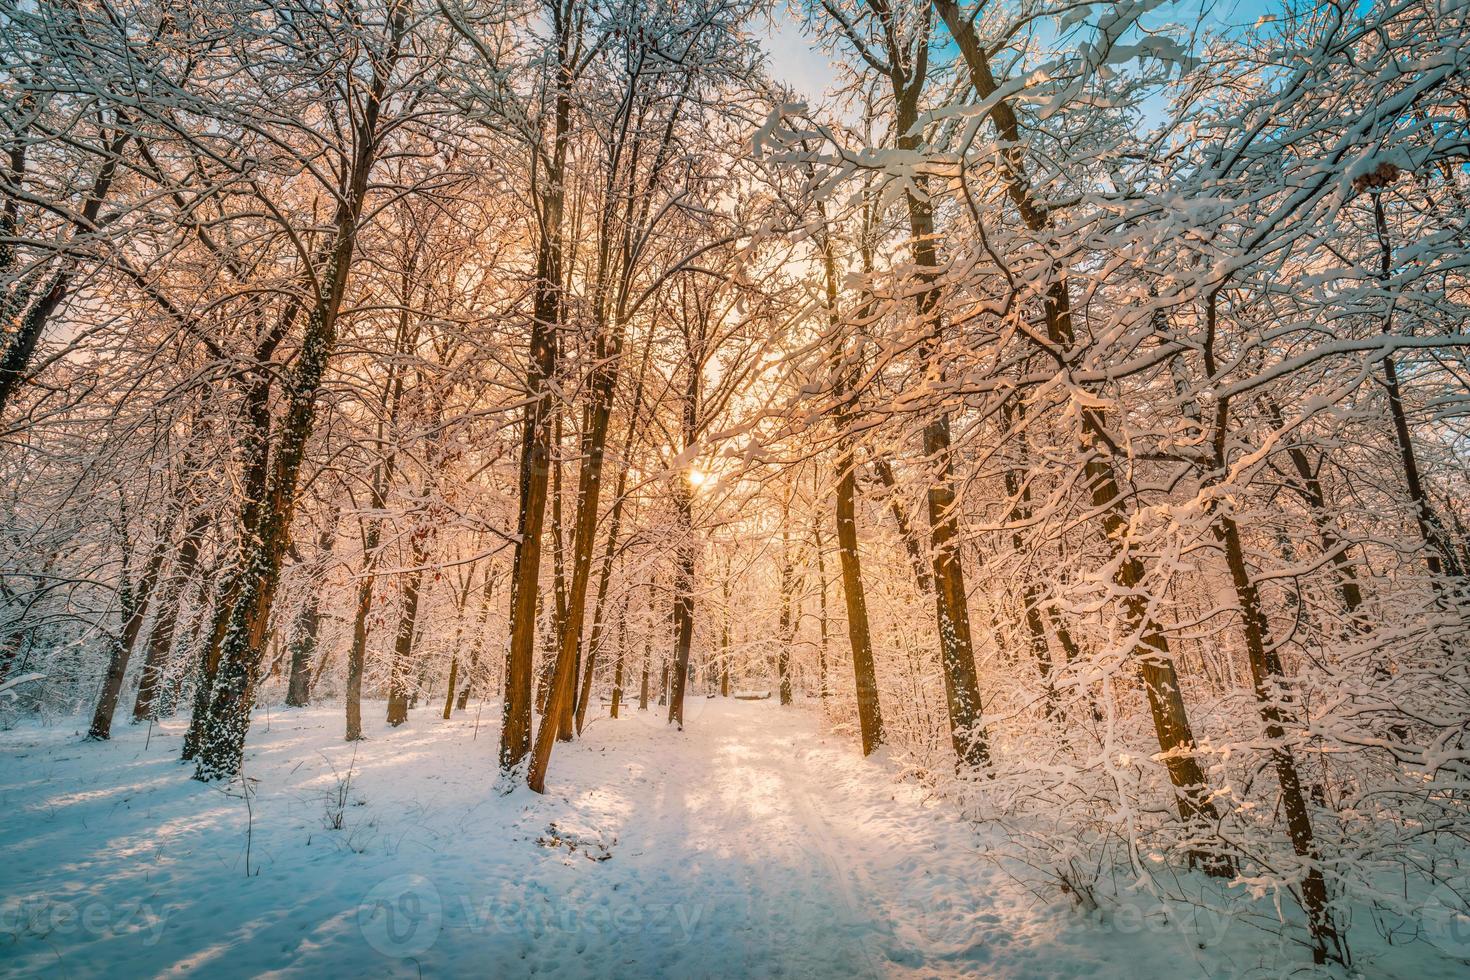 Winter landscape with snow-covered forest. Sunny day, adventure hiking deep in the forest, trail or pathway relaxing scenic view. Seasonal winter nature landscape, frozen woodland, serene peacefulness photo